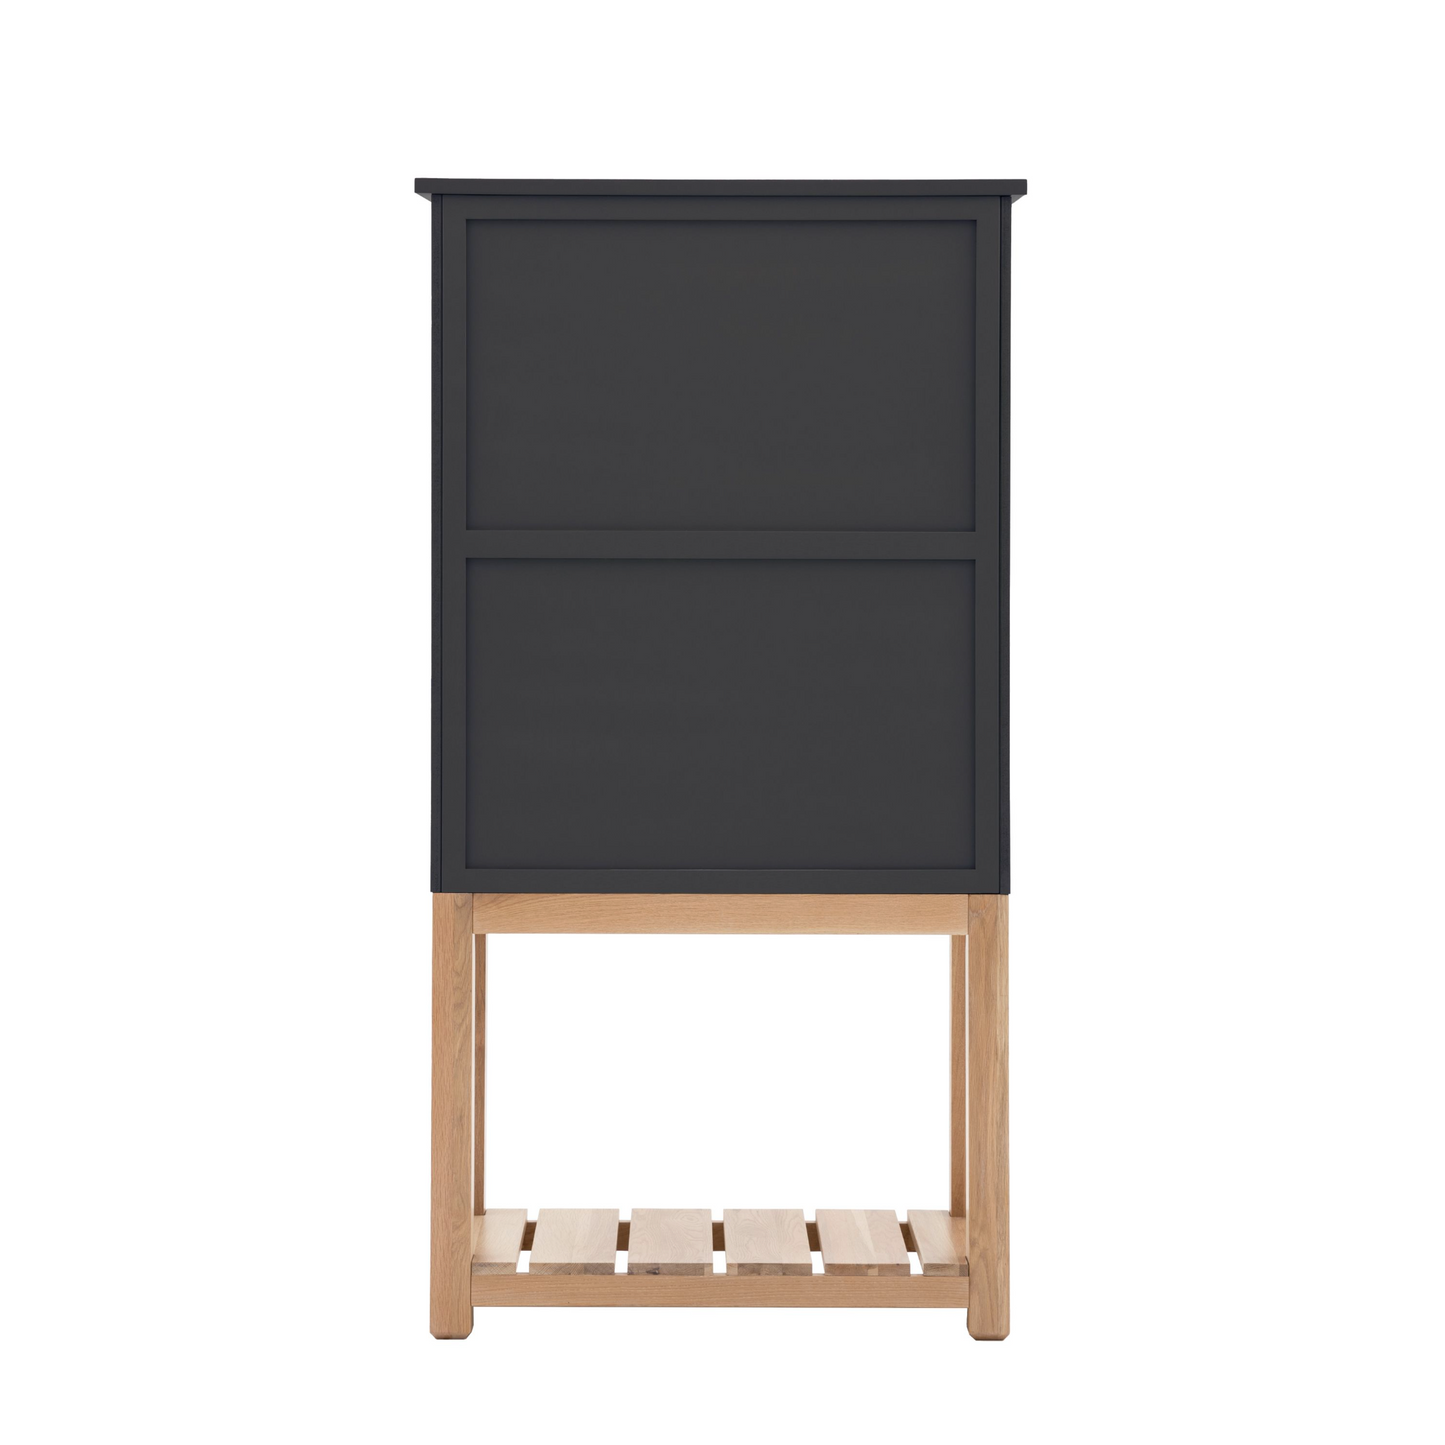 Load image into Gallery viewer, A Buckland 2 Door Storage Cupboard with a wooden shelf on top, perfect for home furniture and interior decor, from Kikiathome.co.uk.
